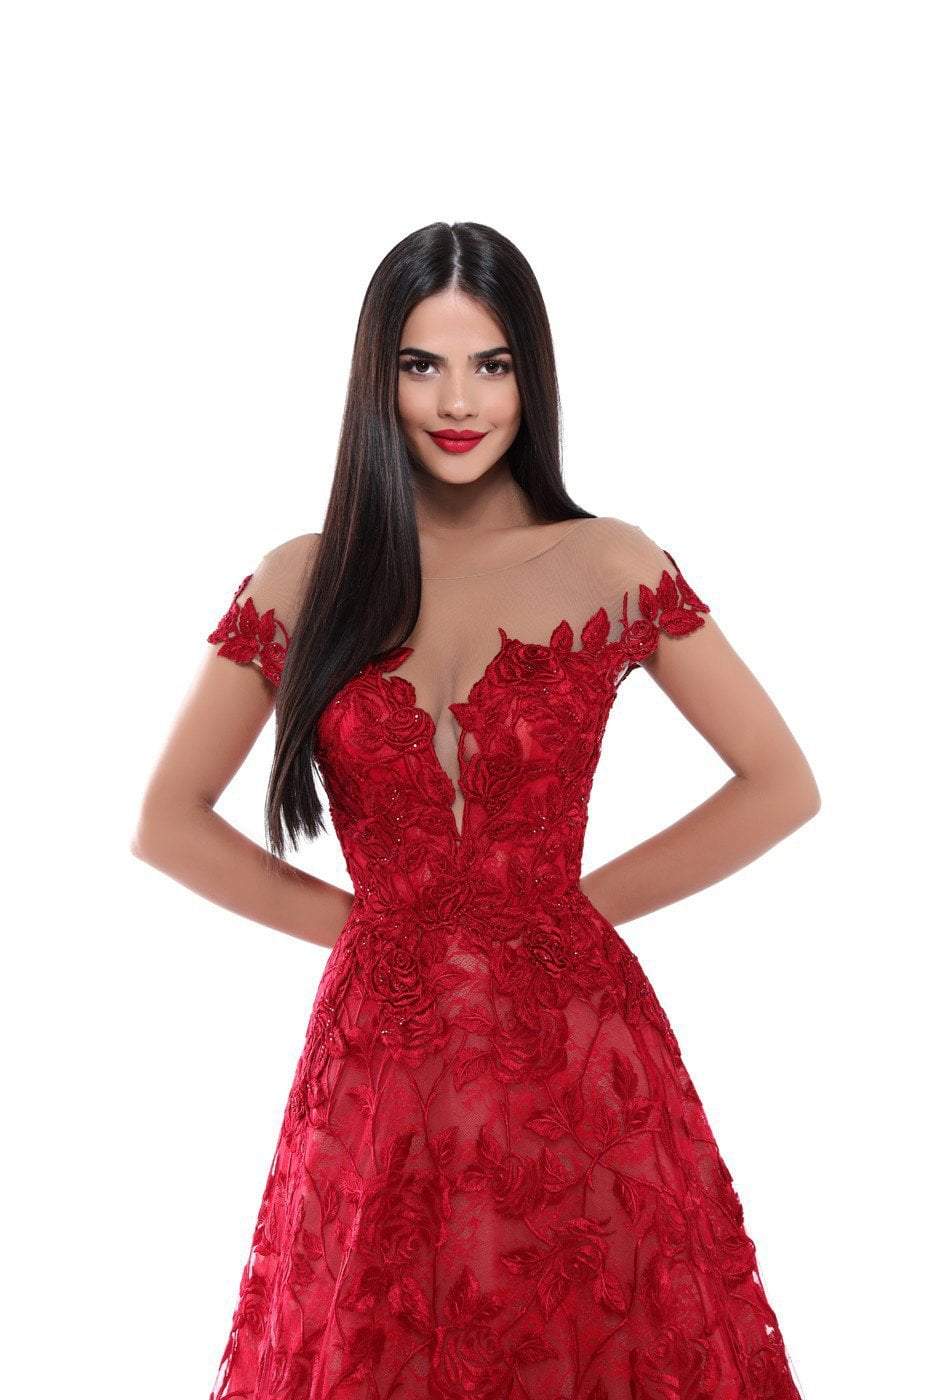 Tarik Ediz - 50500 Floral Lace Appliqued A-Line Prom Gown In Red